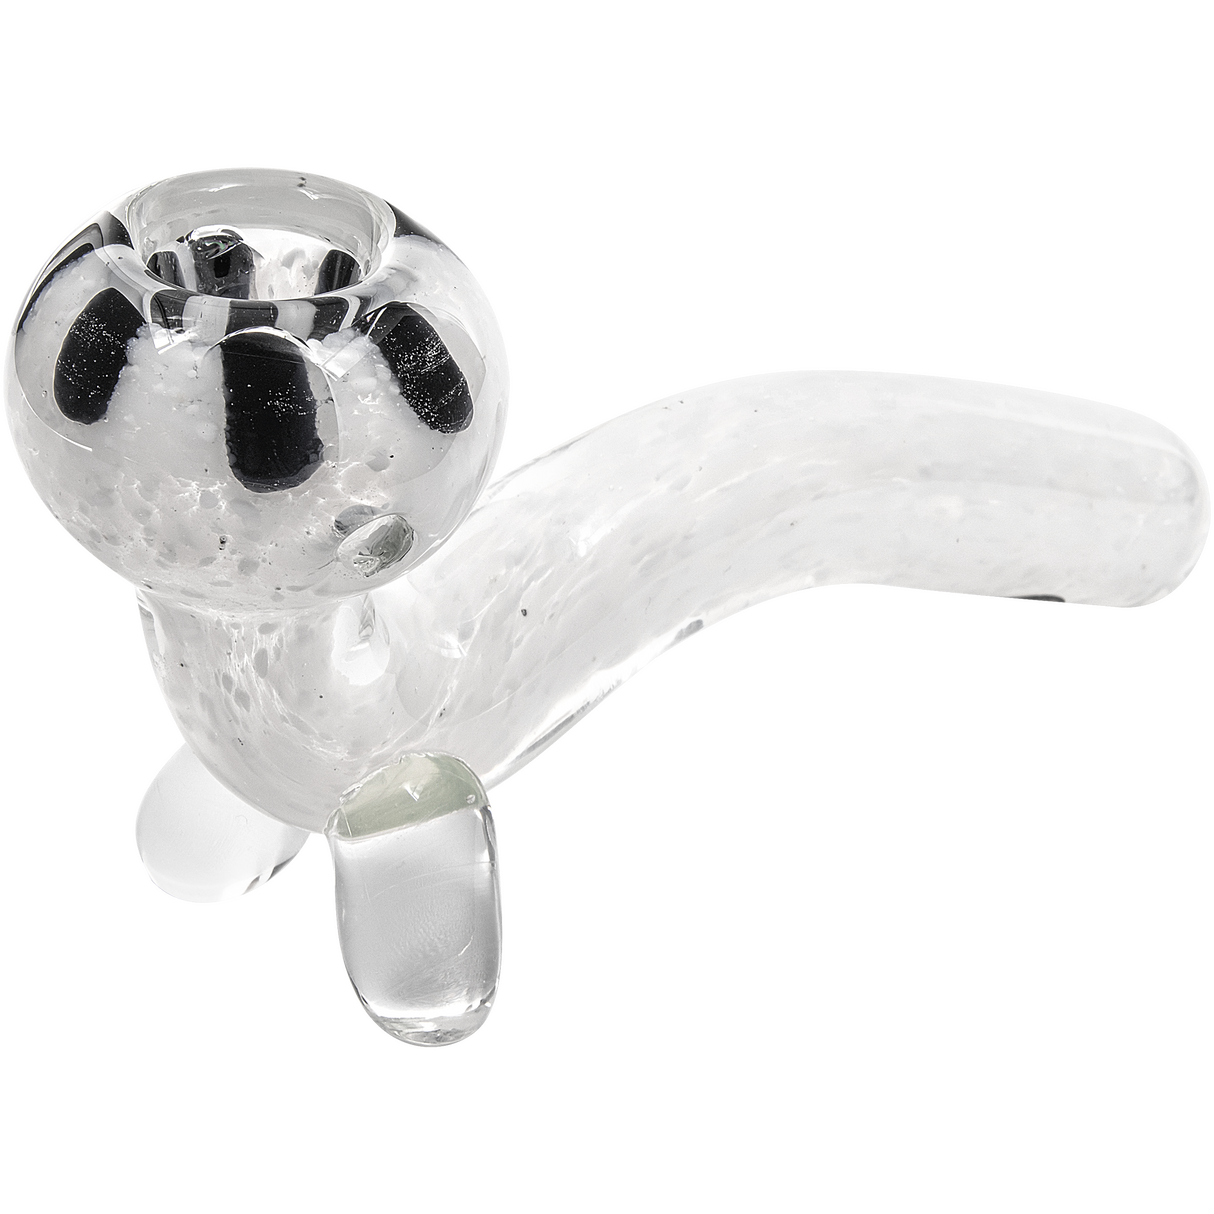 LA Pipes White Fritted Sherlock Hand Pipe with Black Daisy Bowl - Top View